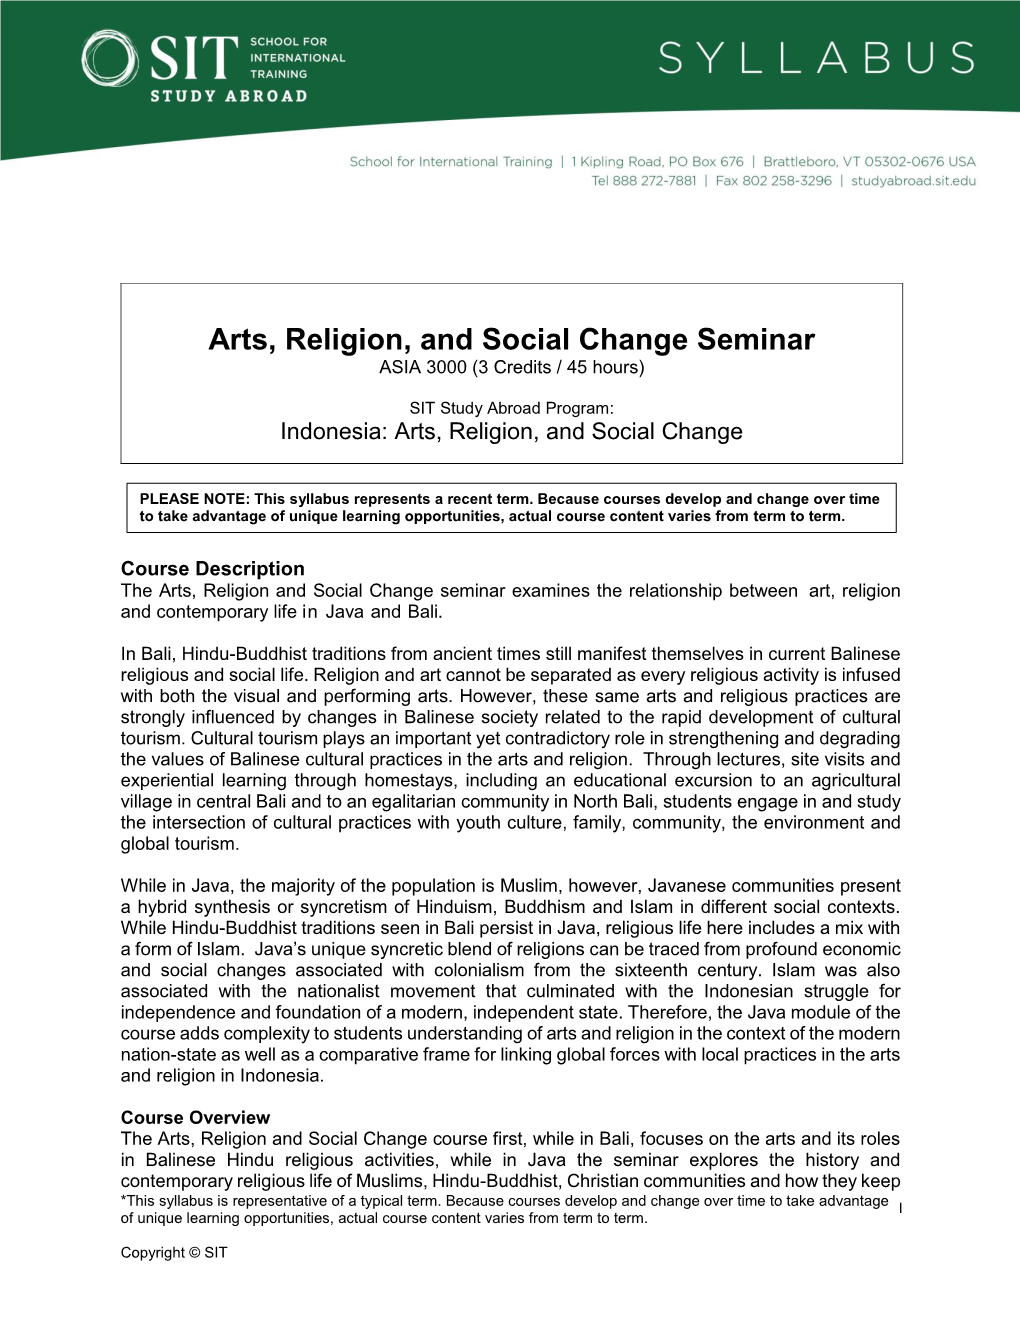 Arts, Religion, and Social Change Seminar ASIA 3000 (3 Credits / 45 Hours)